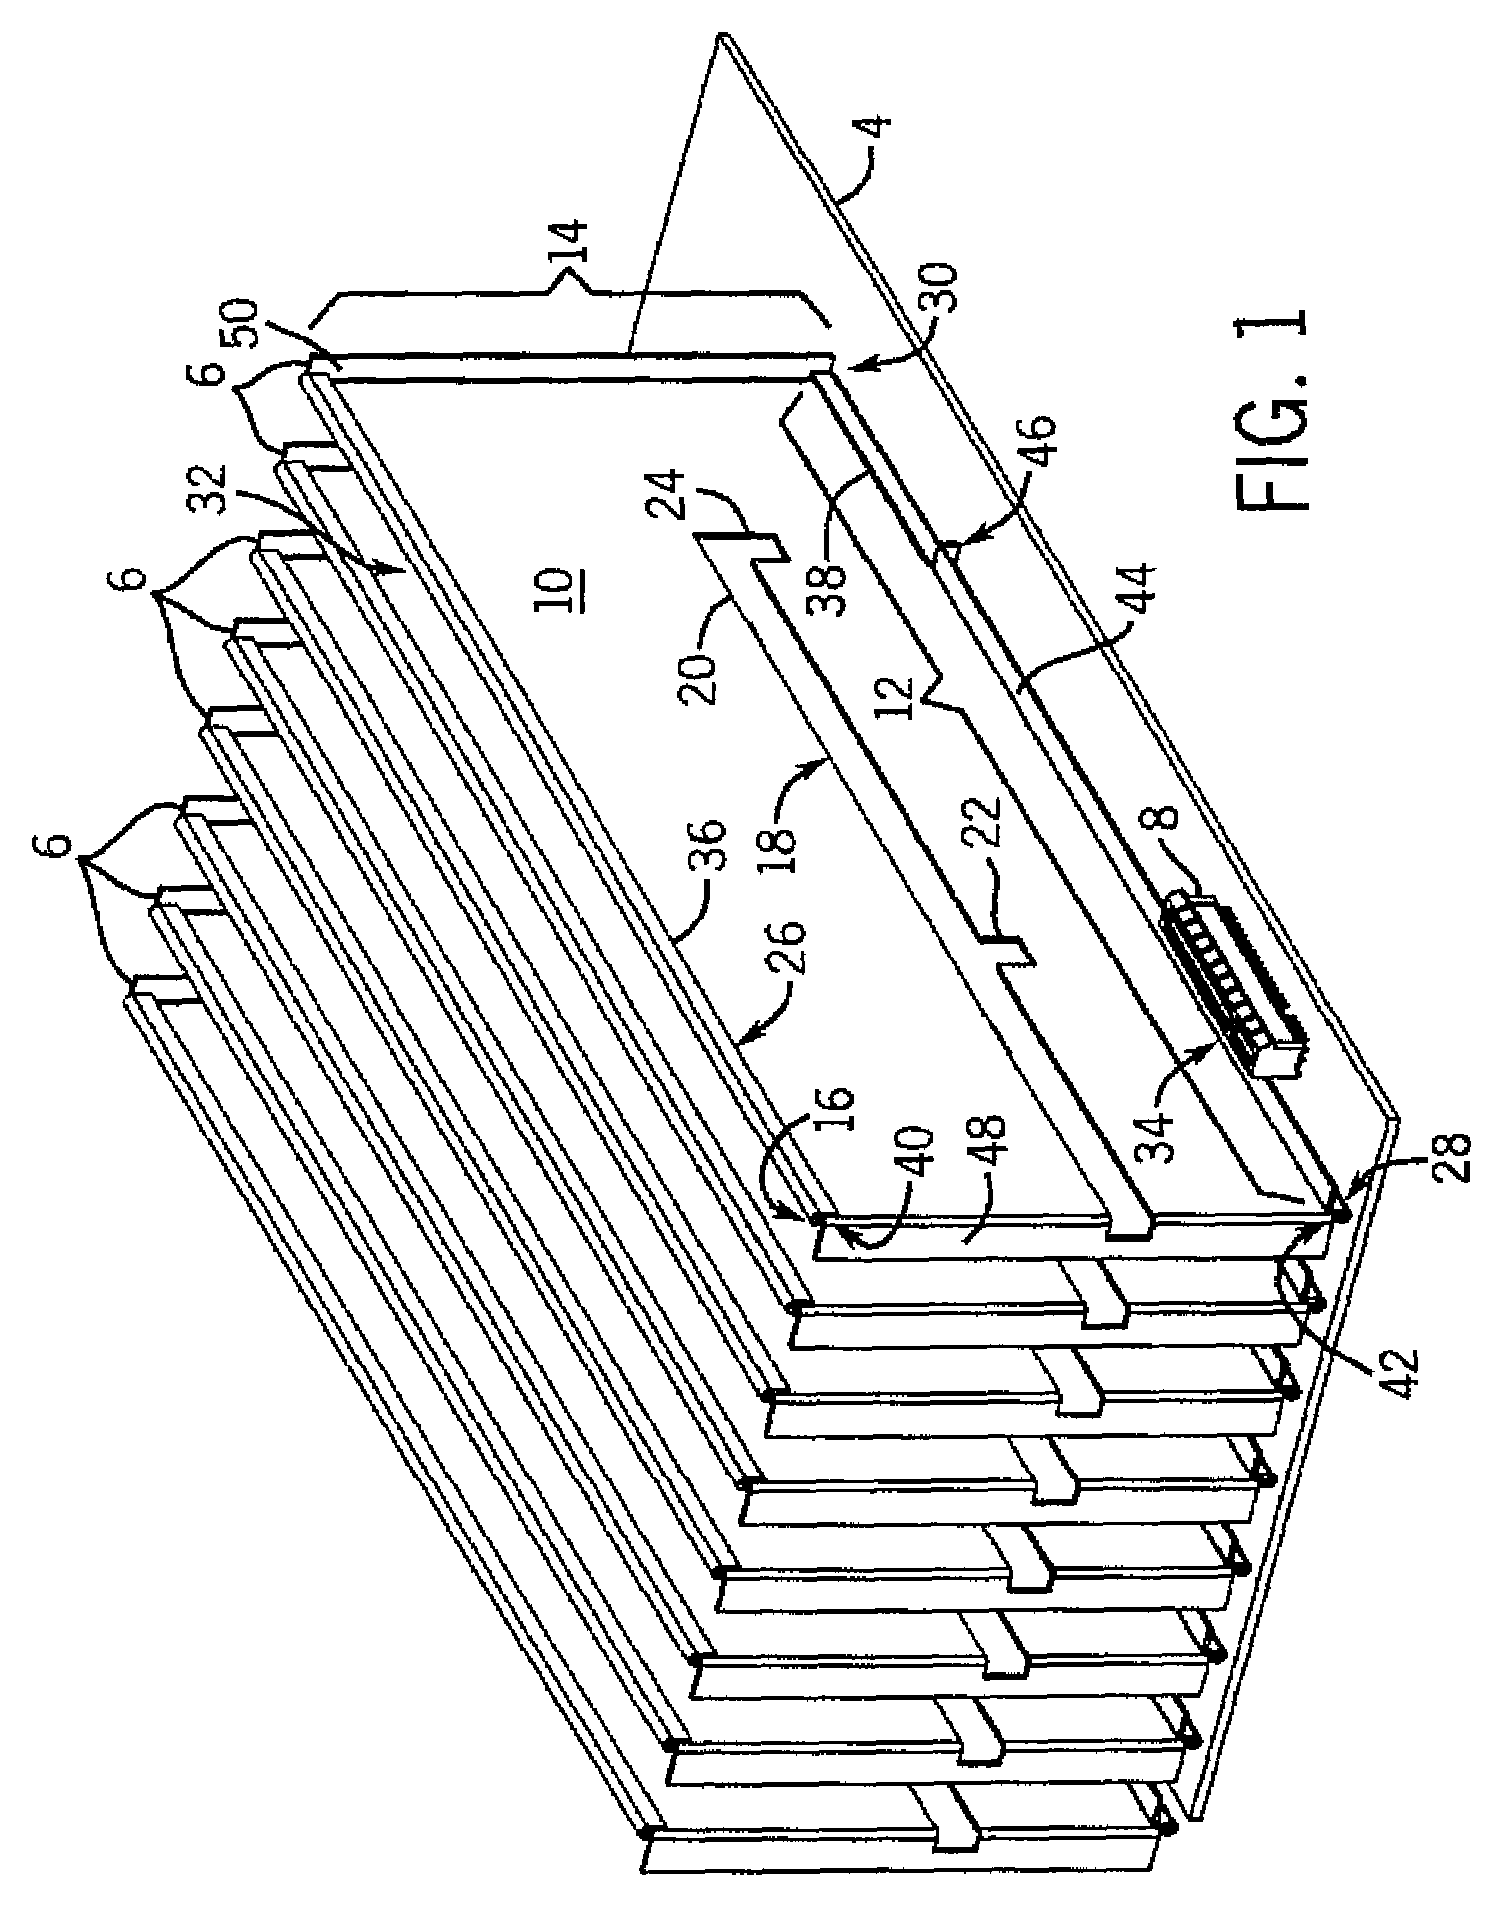 Apparatus and method for installing an electrical support structure